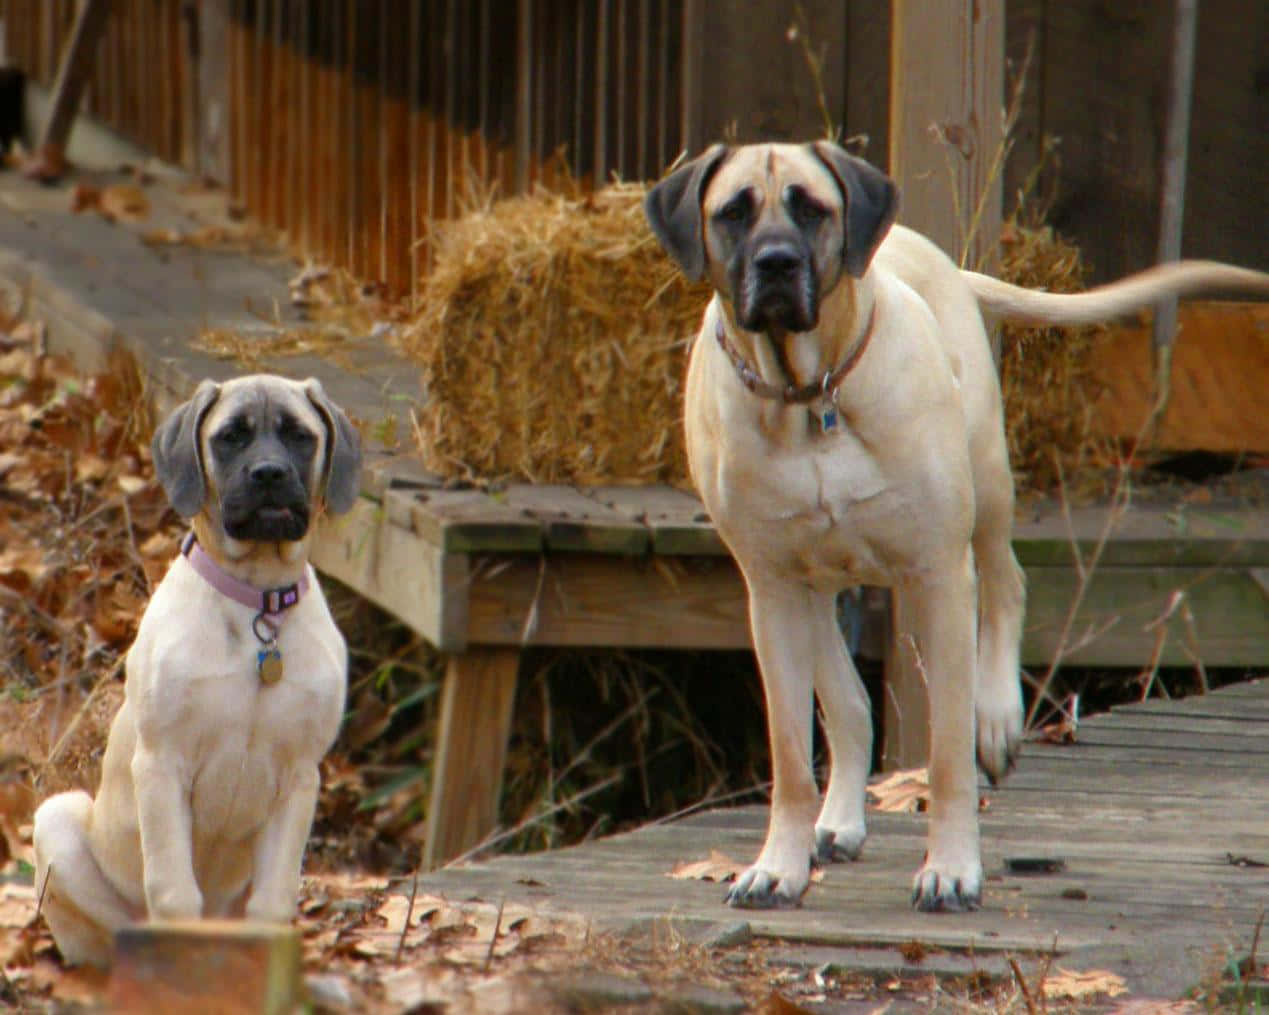 This majestic English Mastiff towers above his loving owners.